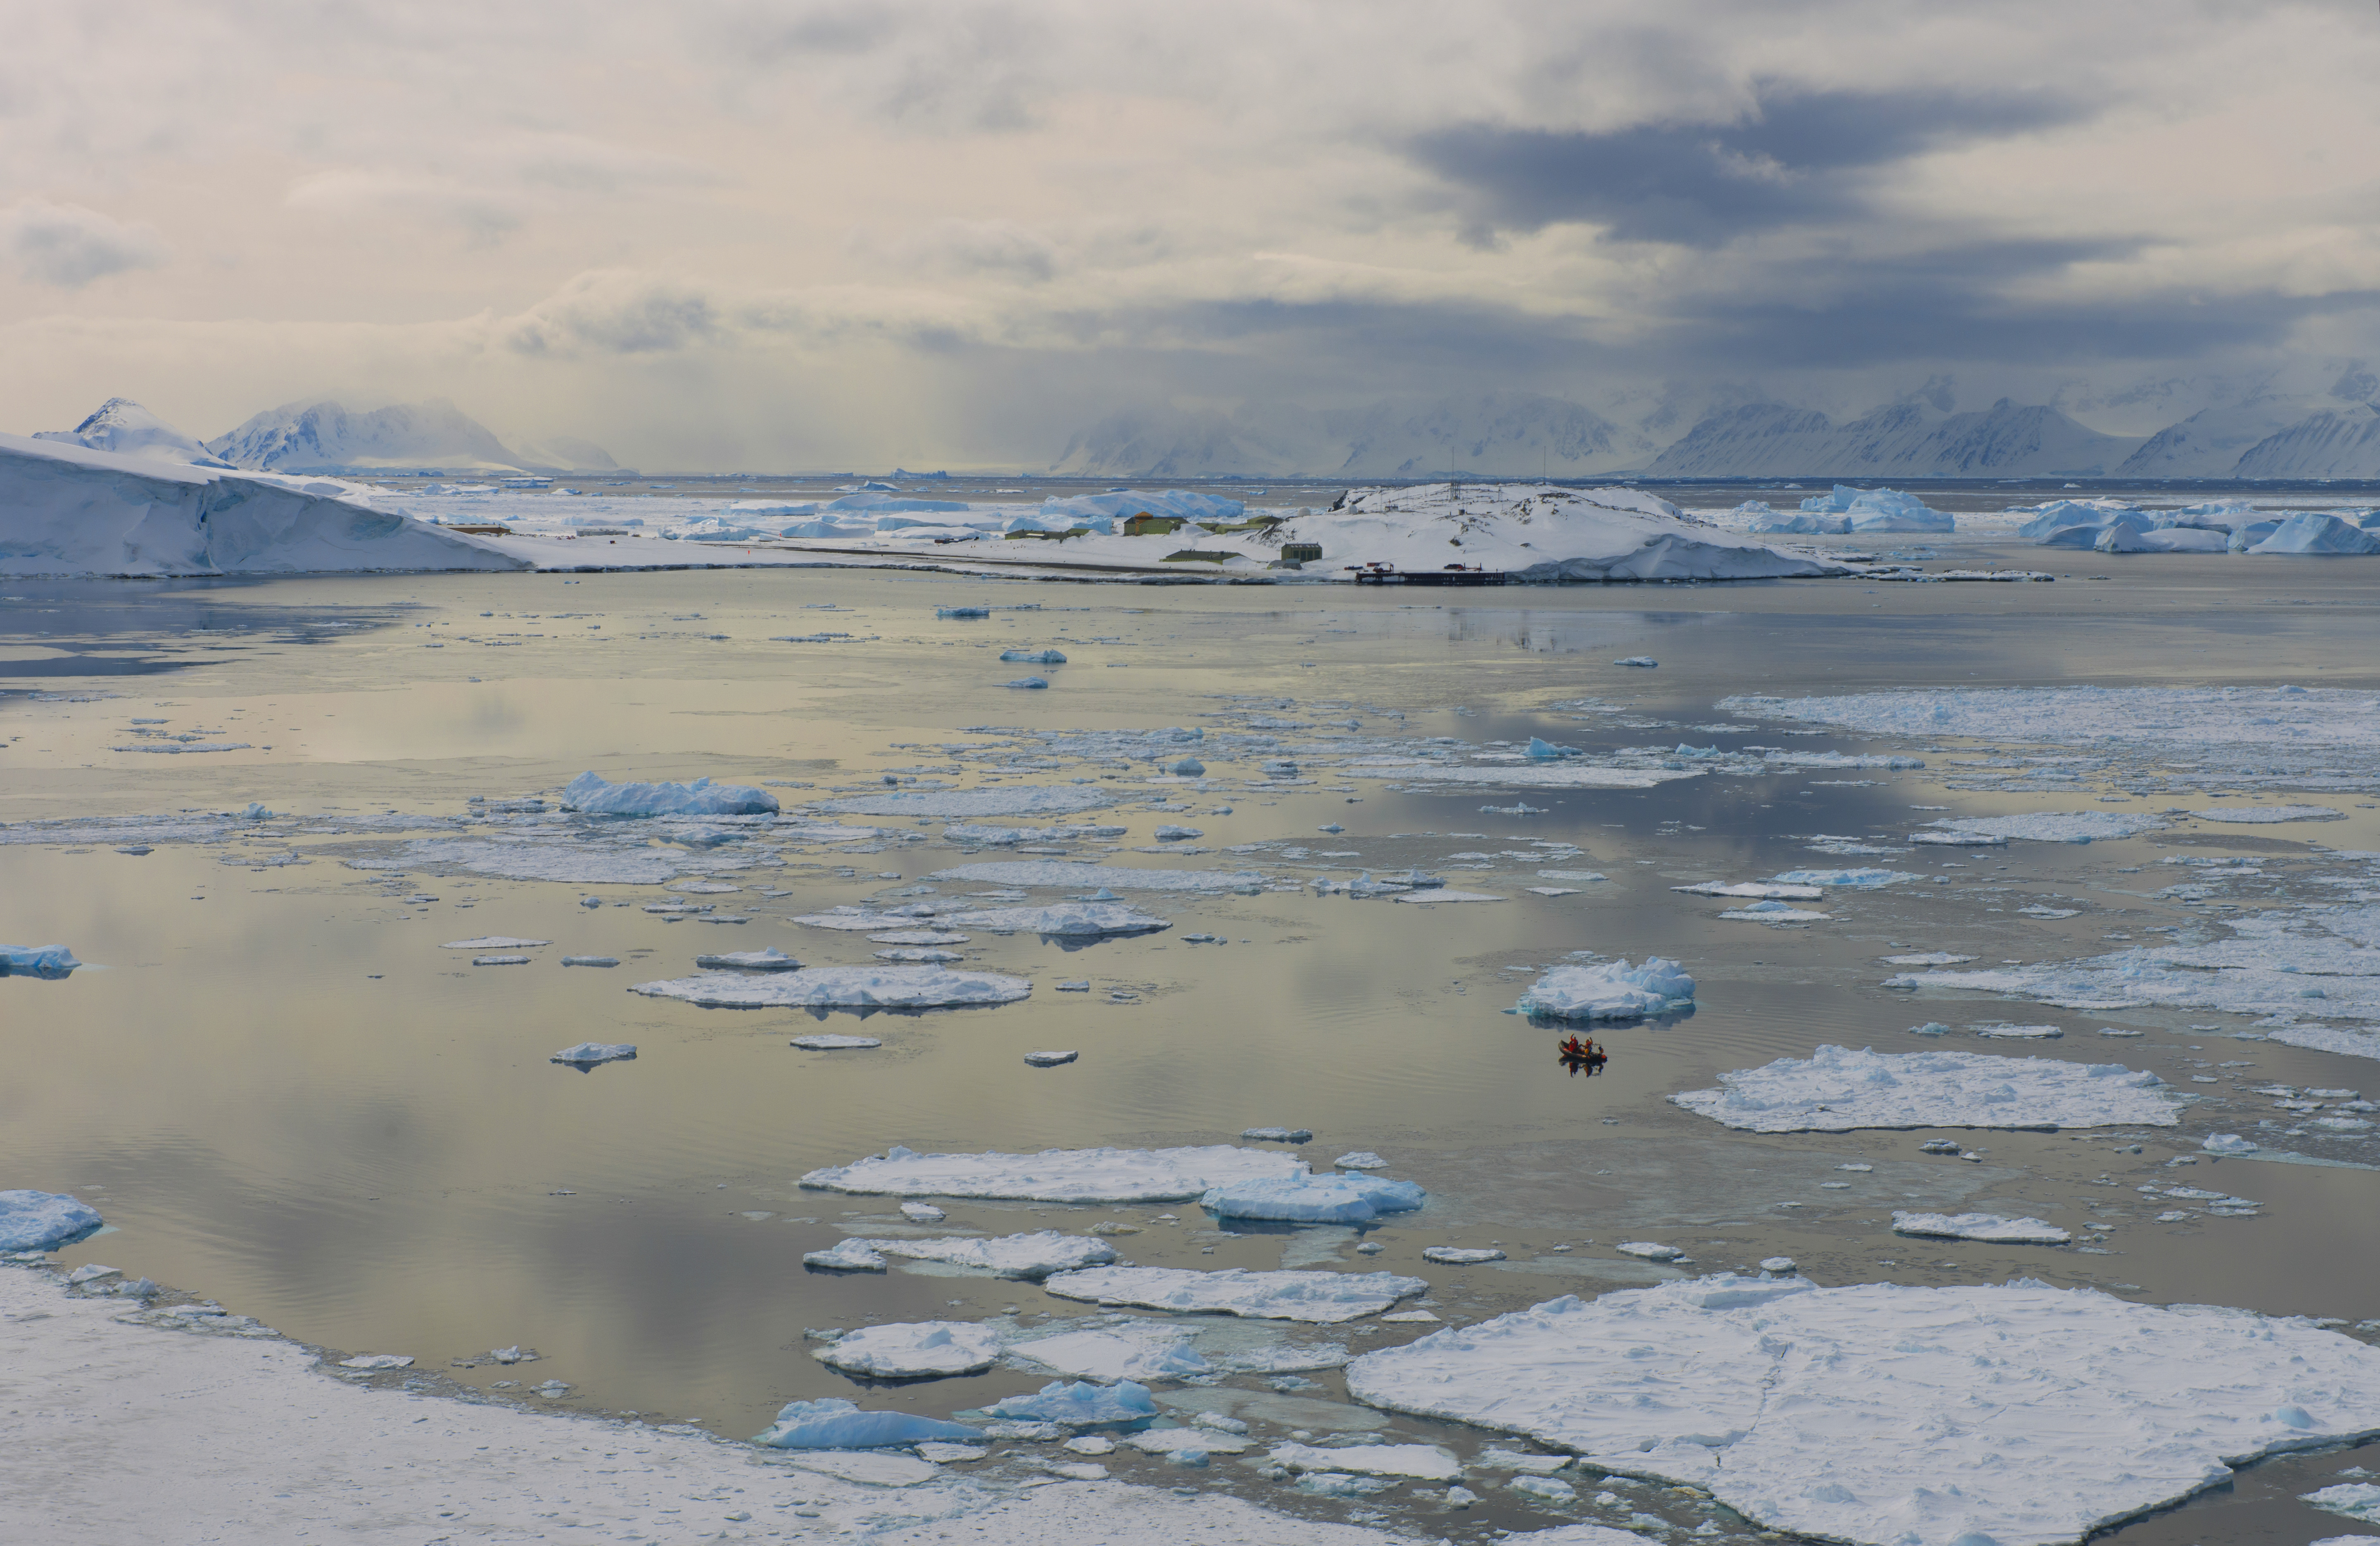 Sea ice in Marguerite Bay on the west side of the Antarctic Peninsula